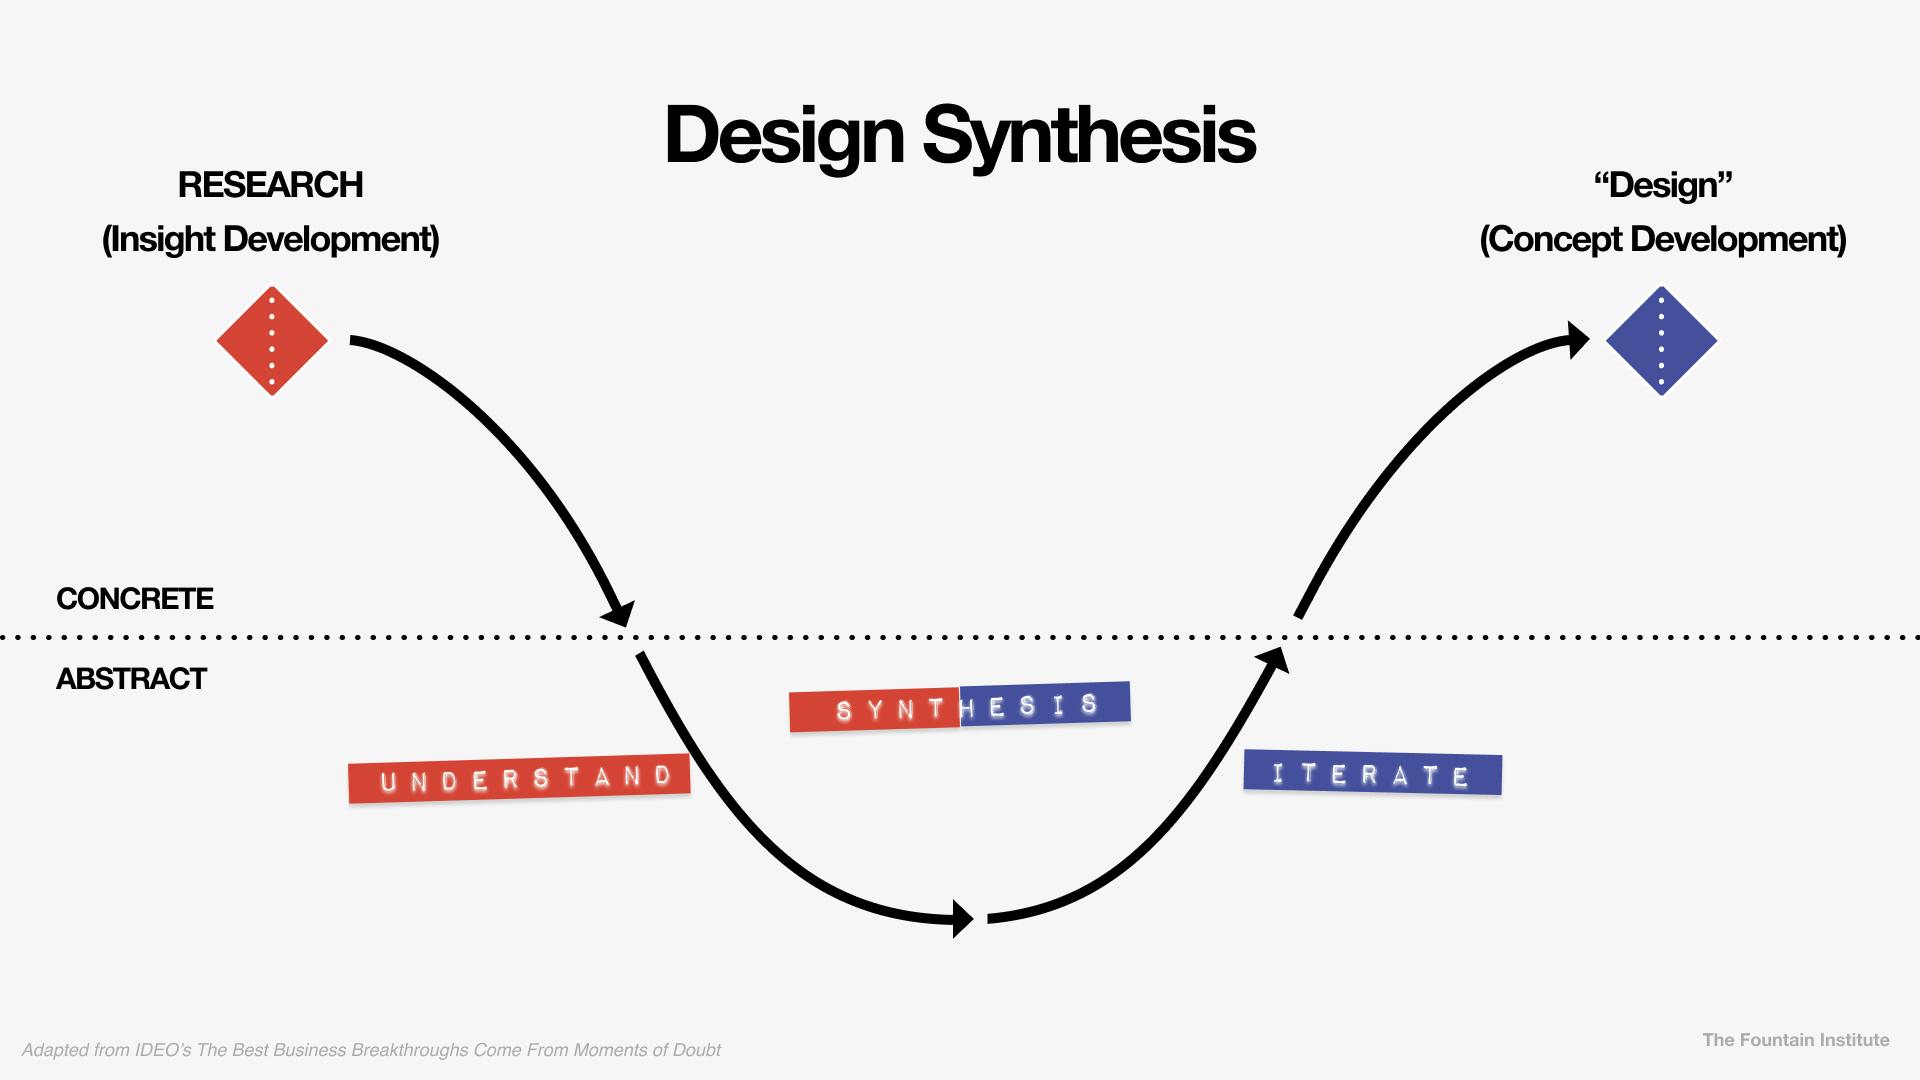 Design Synthesis, an abstract part of the design process